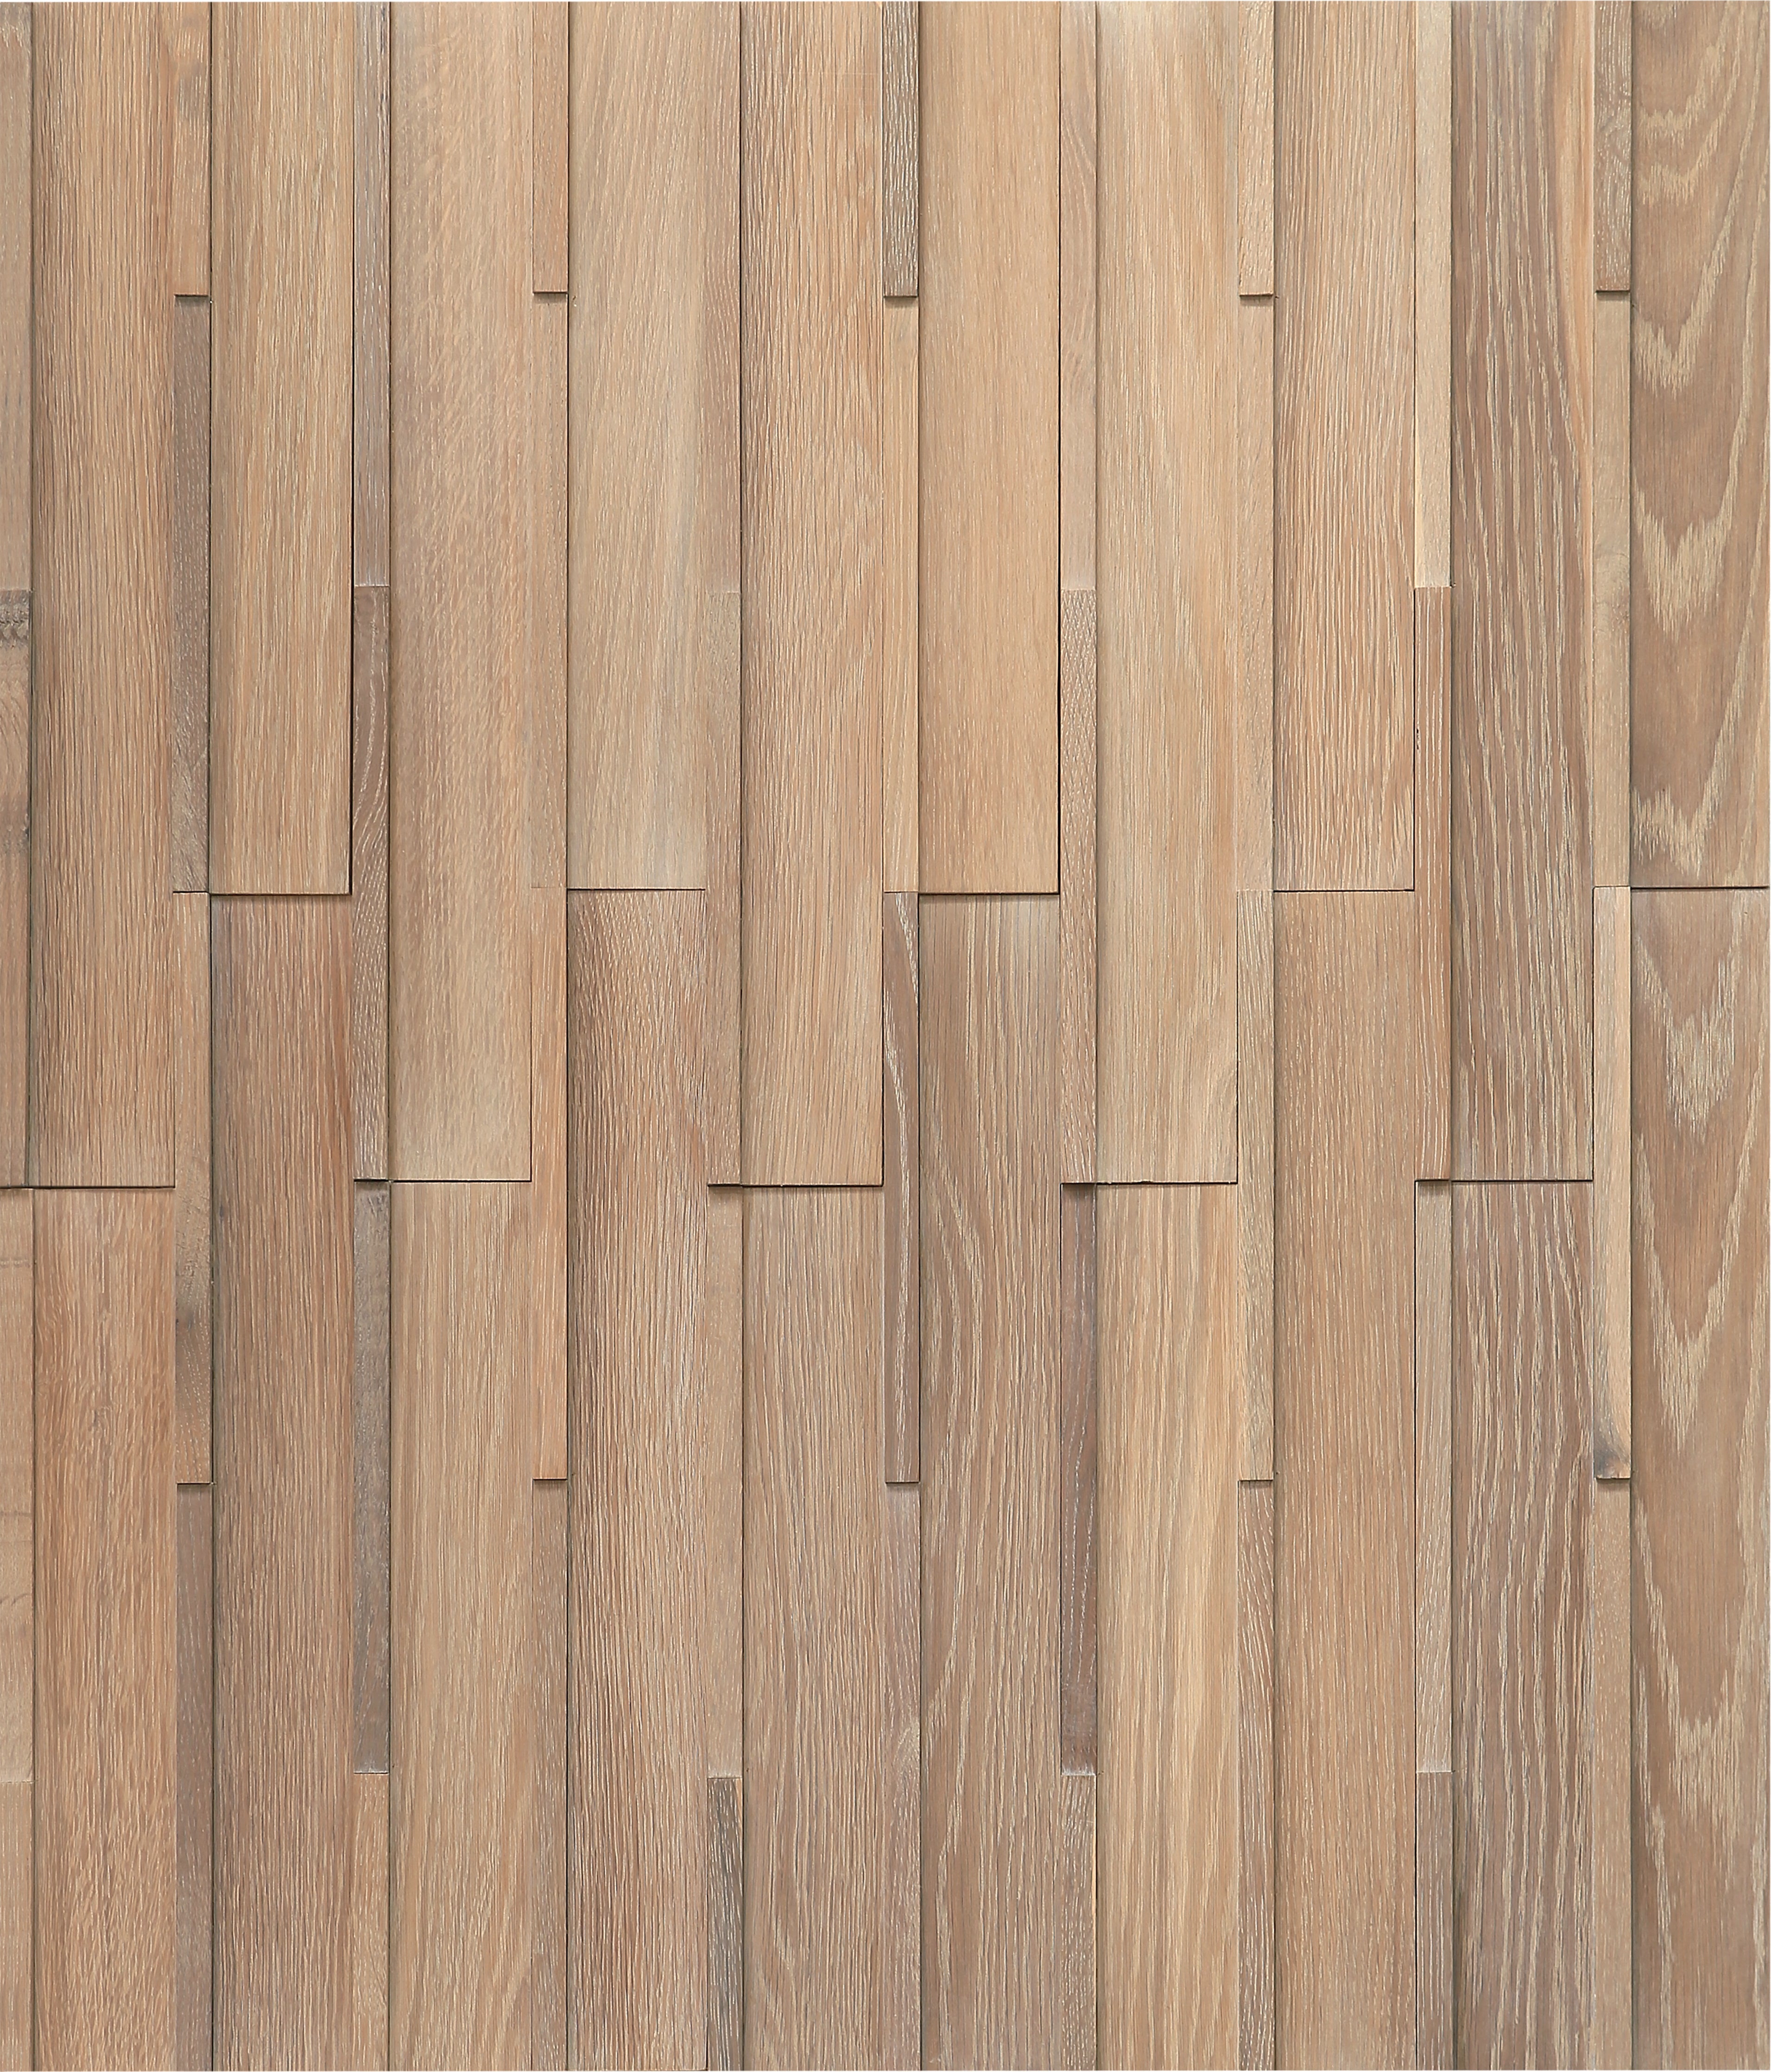 duchateau inceptiv kubik lugano oak three dimensional wall natural wood panel matte lacquer for interior use distributed by surface group international